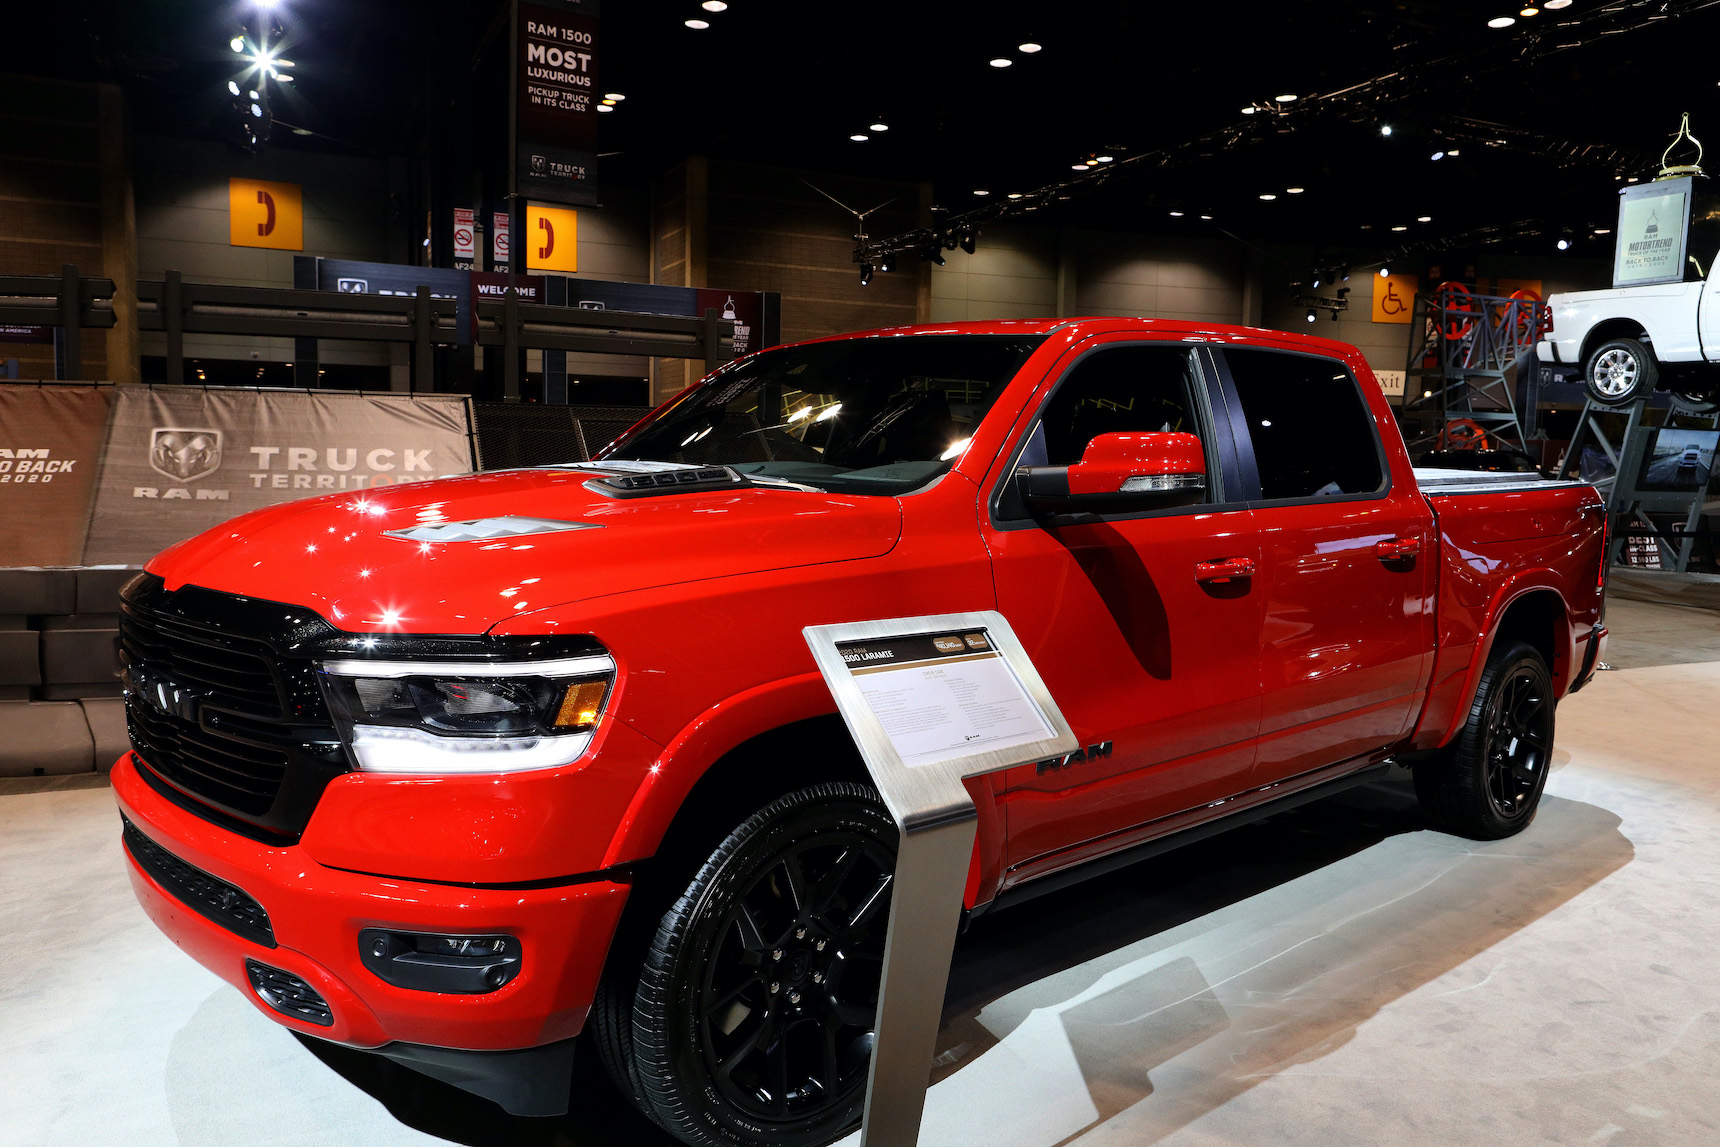 2020 RAM 1500 Laramie is on display at the 112th Annual Chicago Auto Show